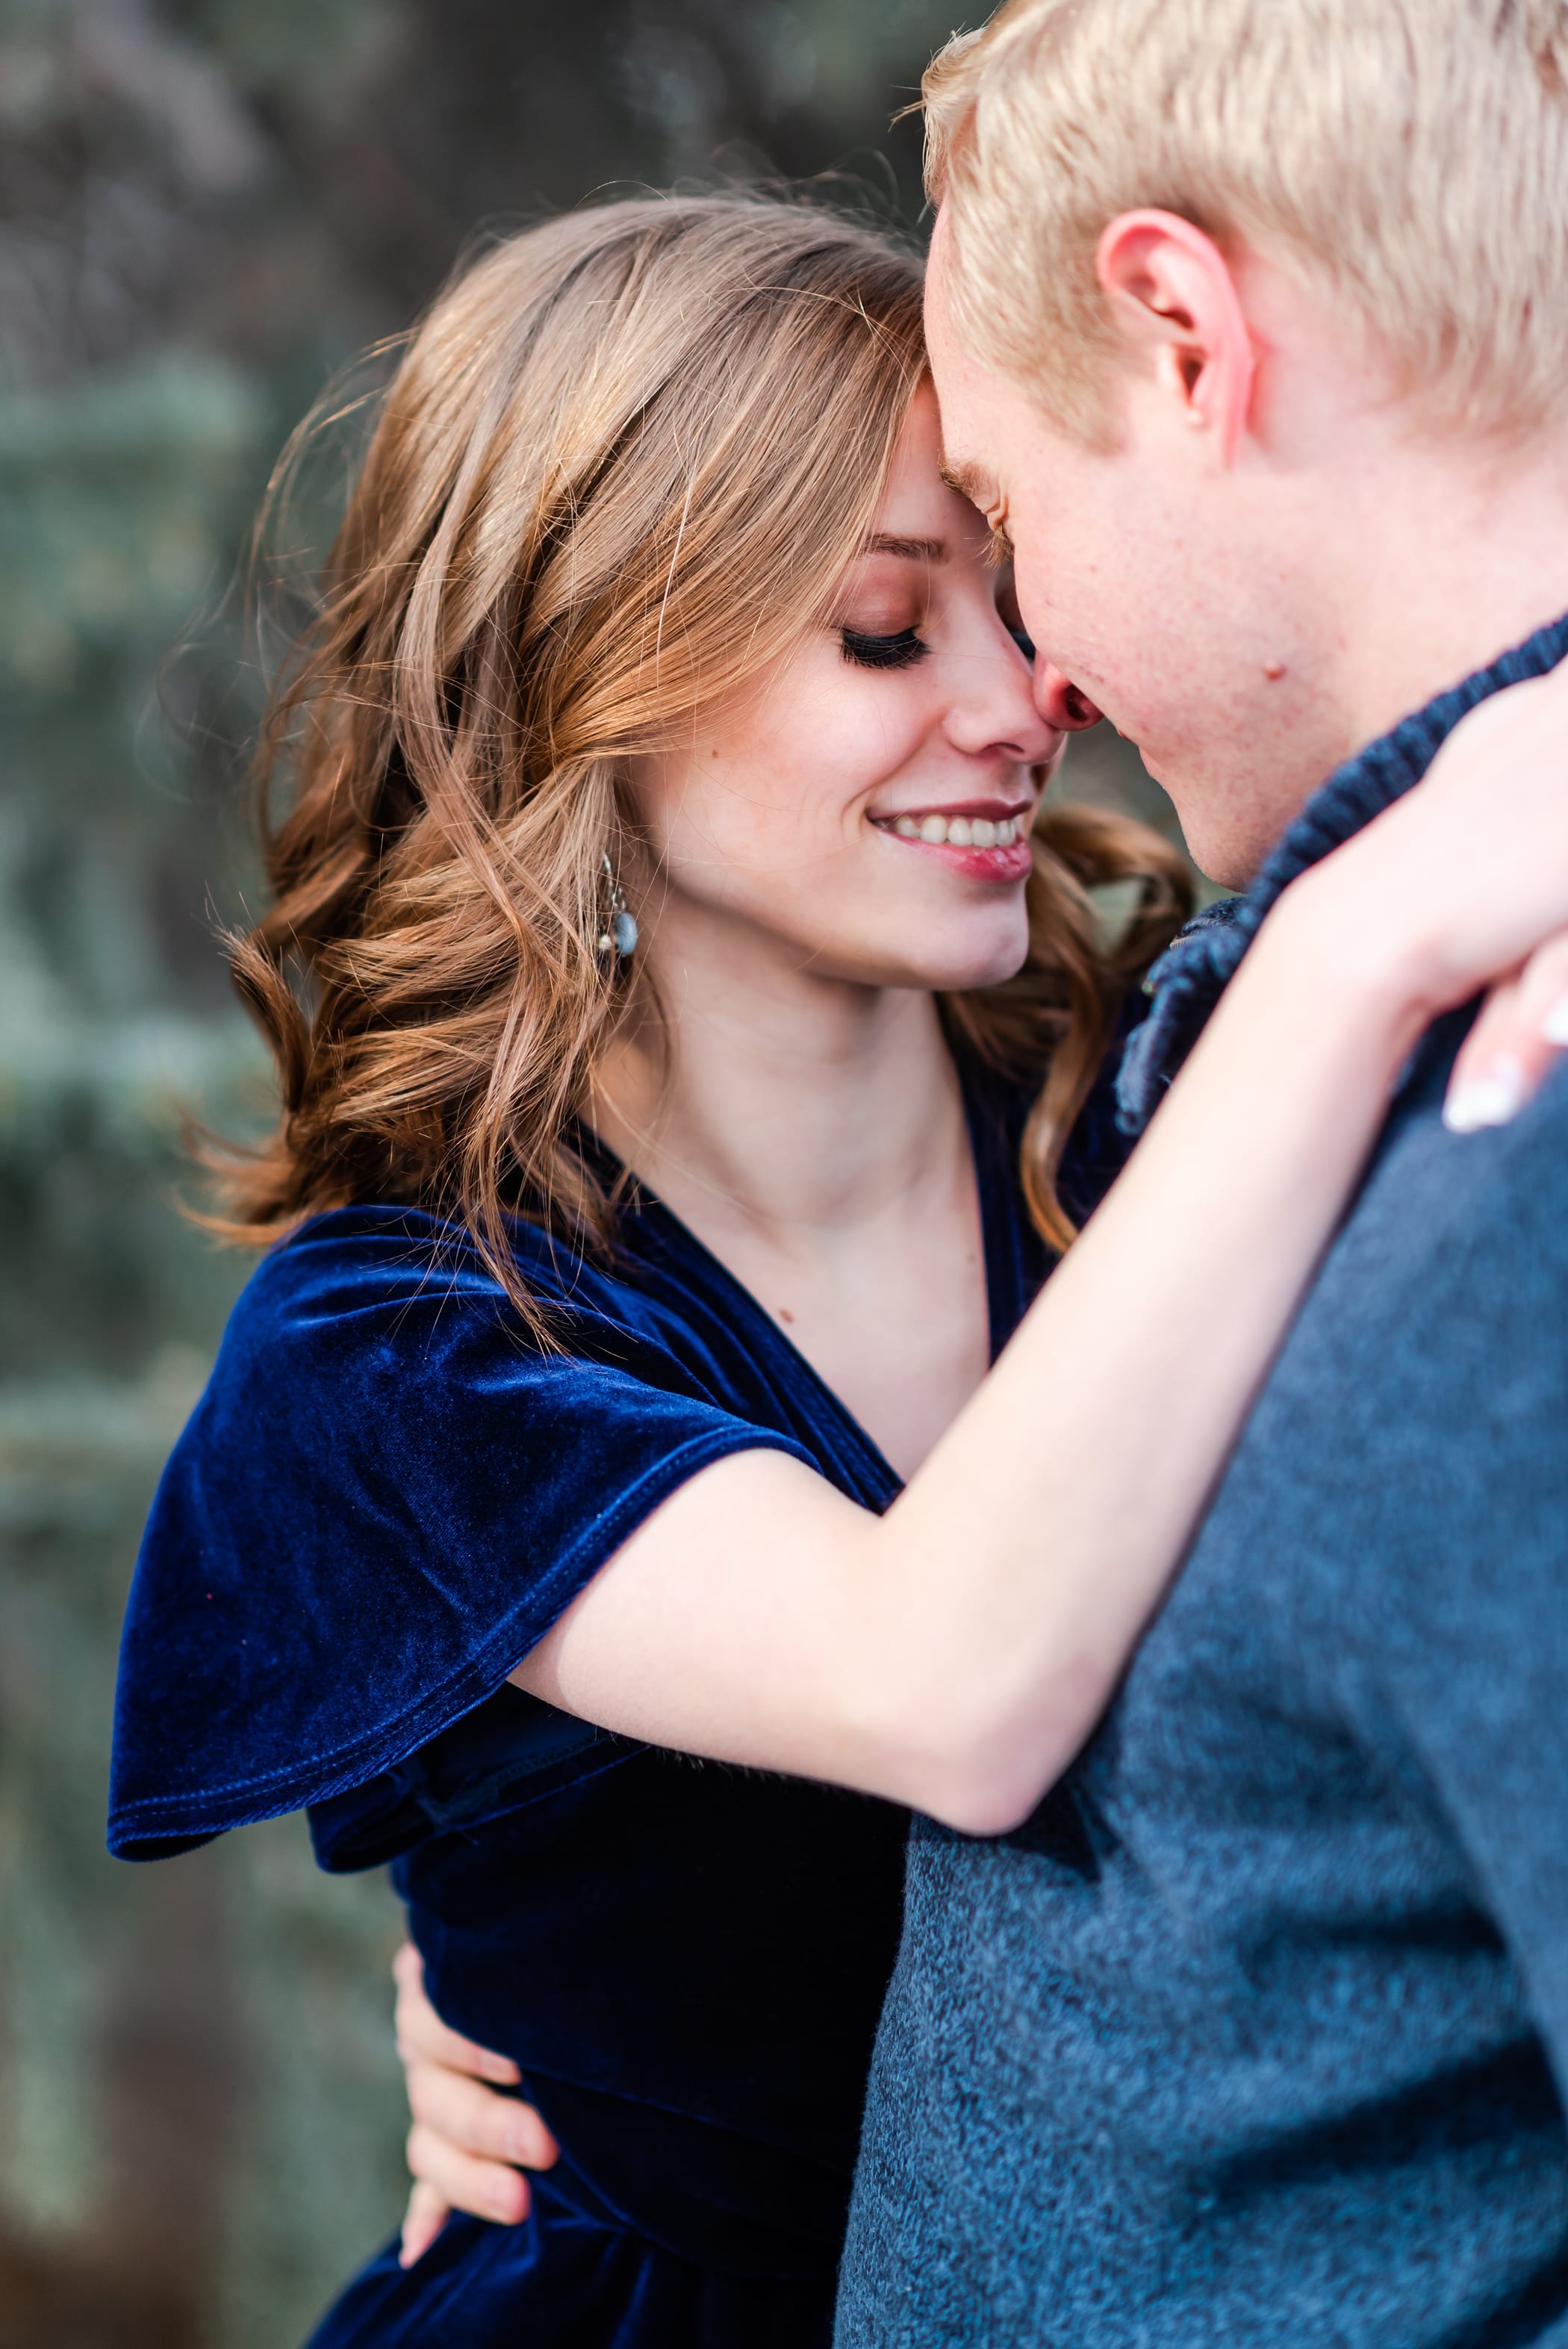 Idaho Winter Engagements by Michelle & Logan